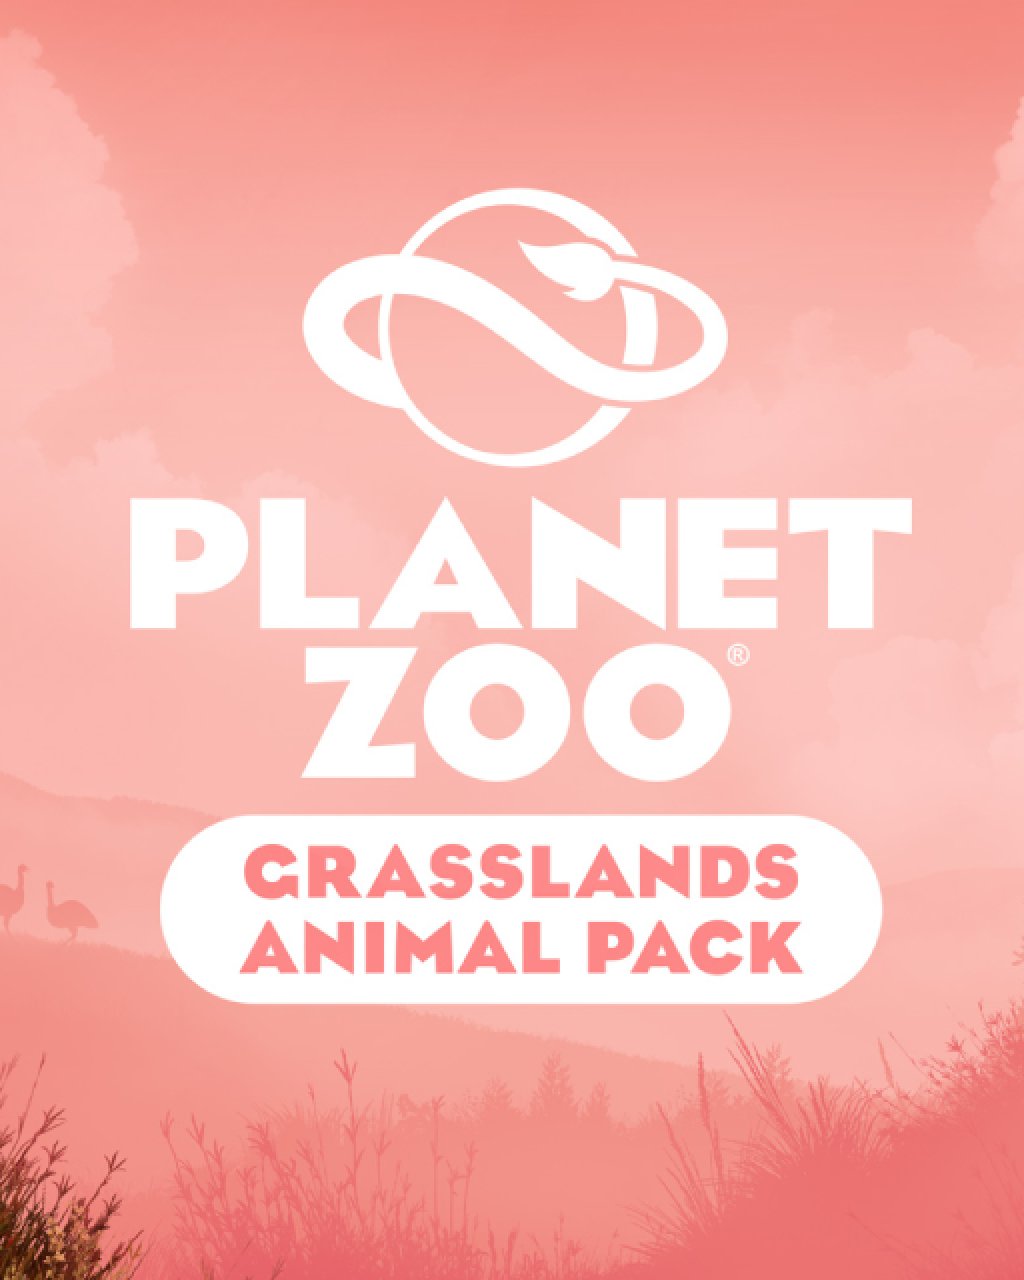 ESD Planet Zoo Grasslands Animal Pack